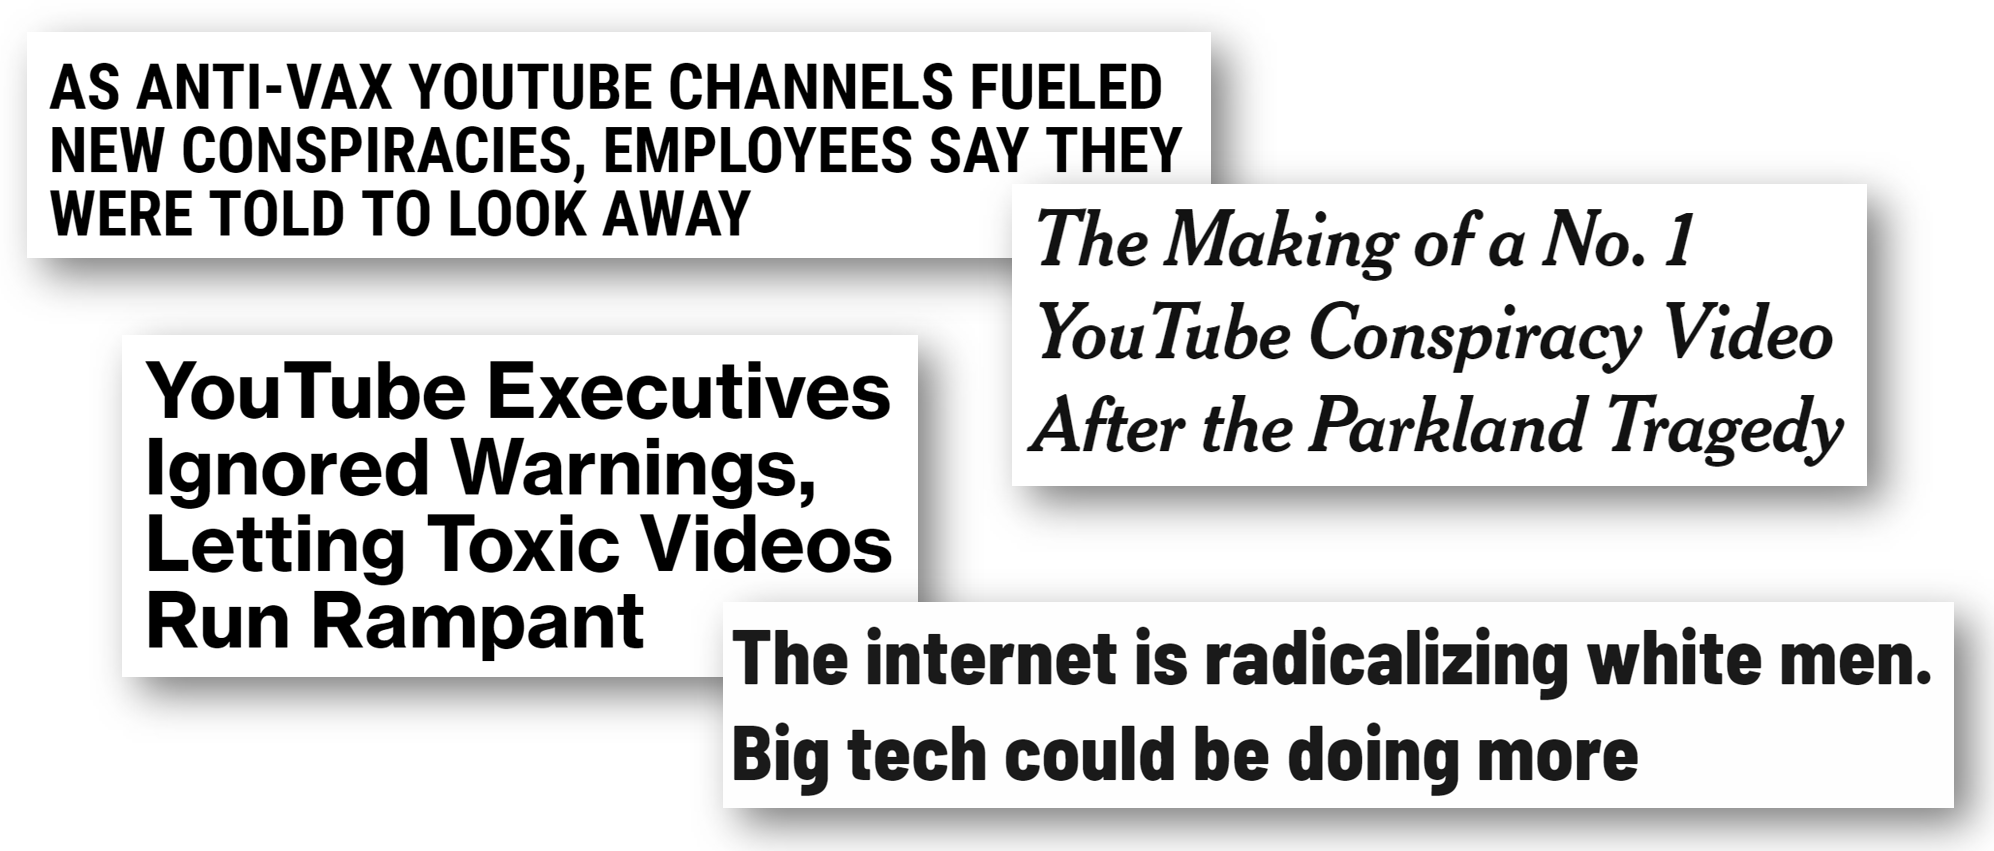 Headlines about YouTube from CNN, Newsweek, New York Times, & Bloomberg